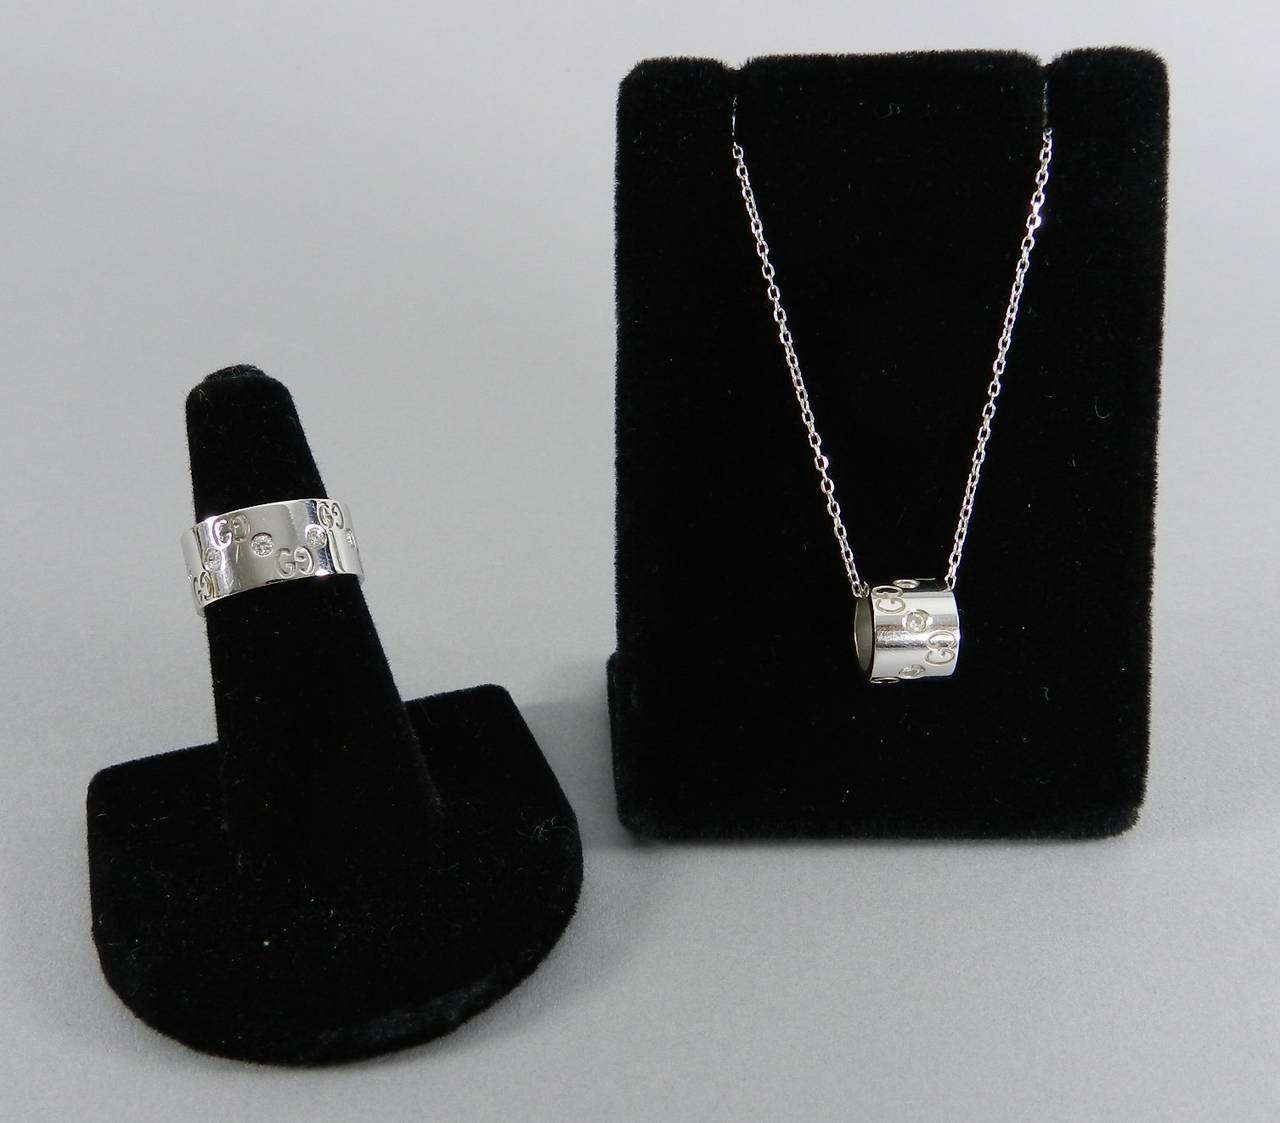 Gucci 18k white gold and diamond ring and pendant necklace set.  Excellent pre-owned condition. Ring is 3/8